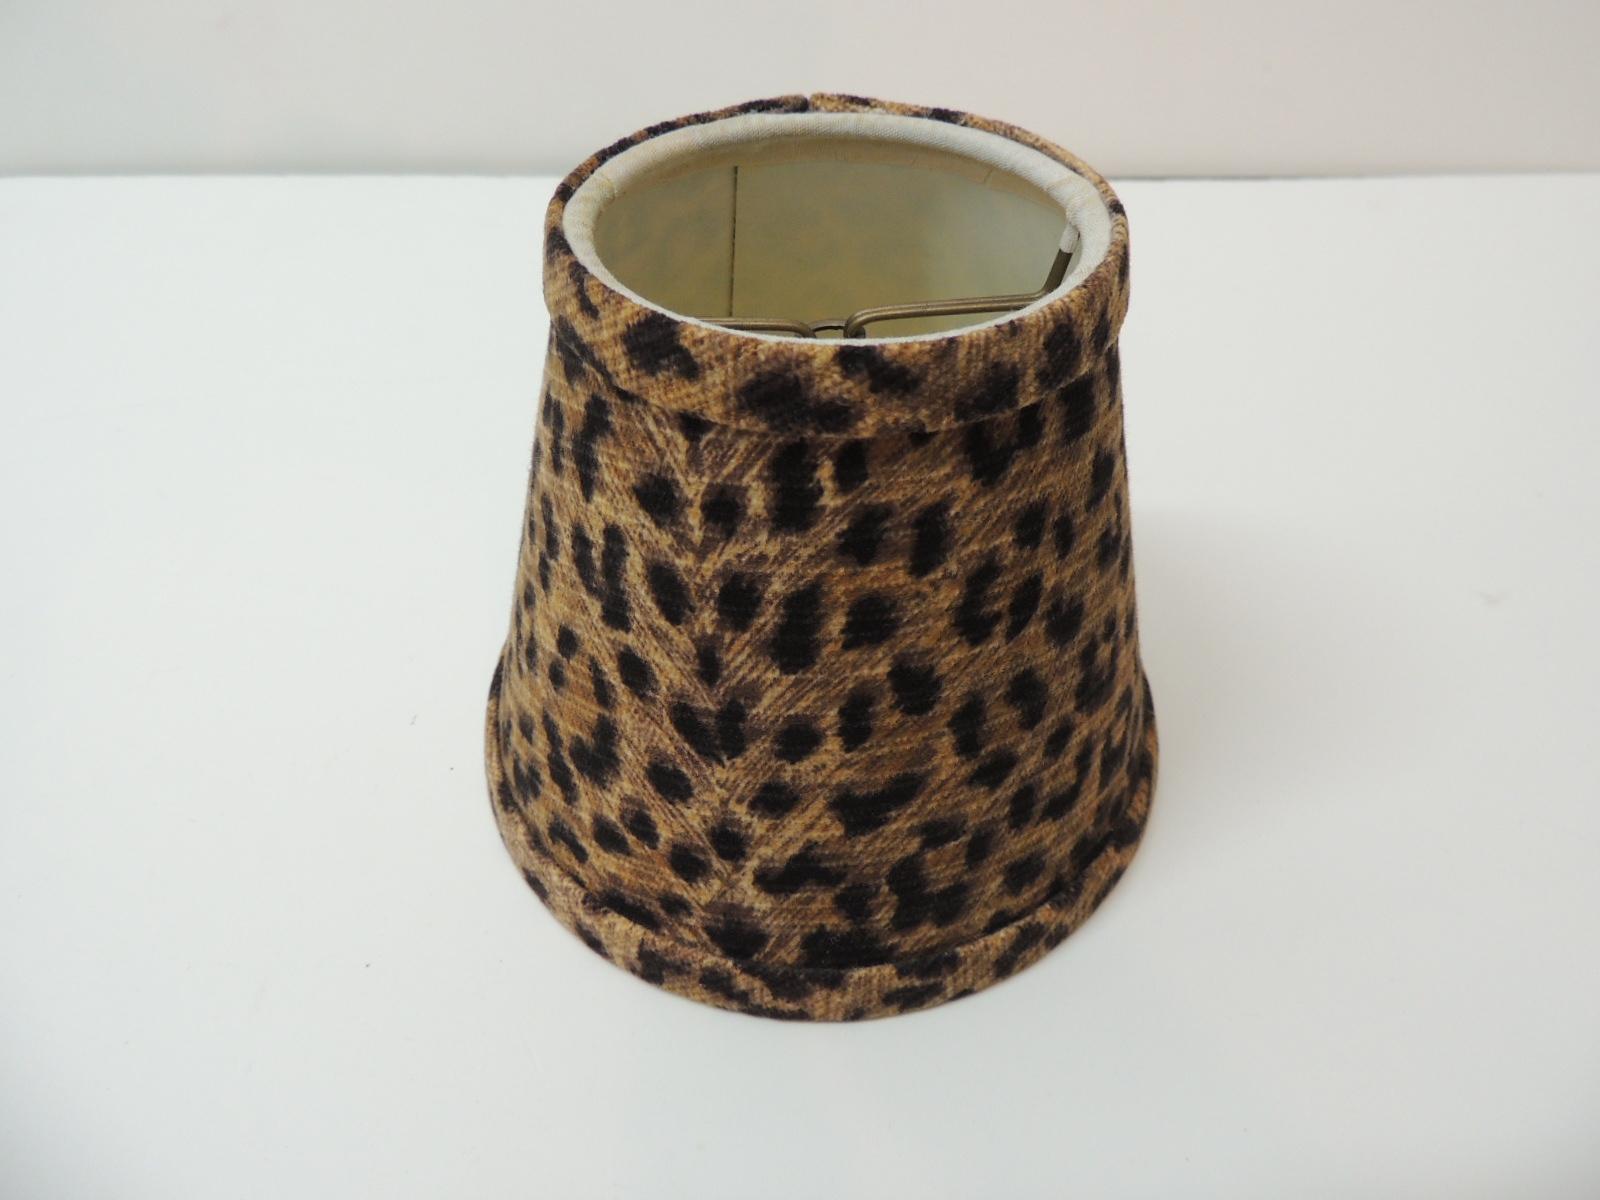 Small candelabra leopard cotton fabric woven lamp shade and self welt.
Small brass clip-on shade.
Ideal for single table lamp, sconce.
Size: 5” W at bottom x 4.5” H x 3” top.